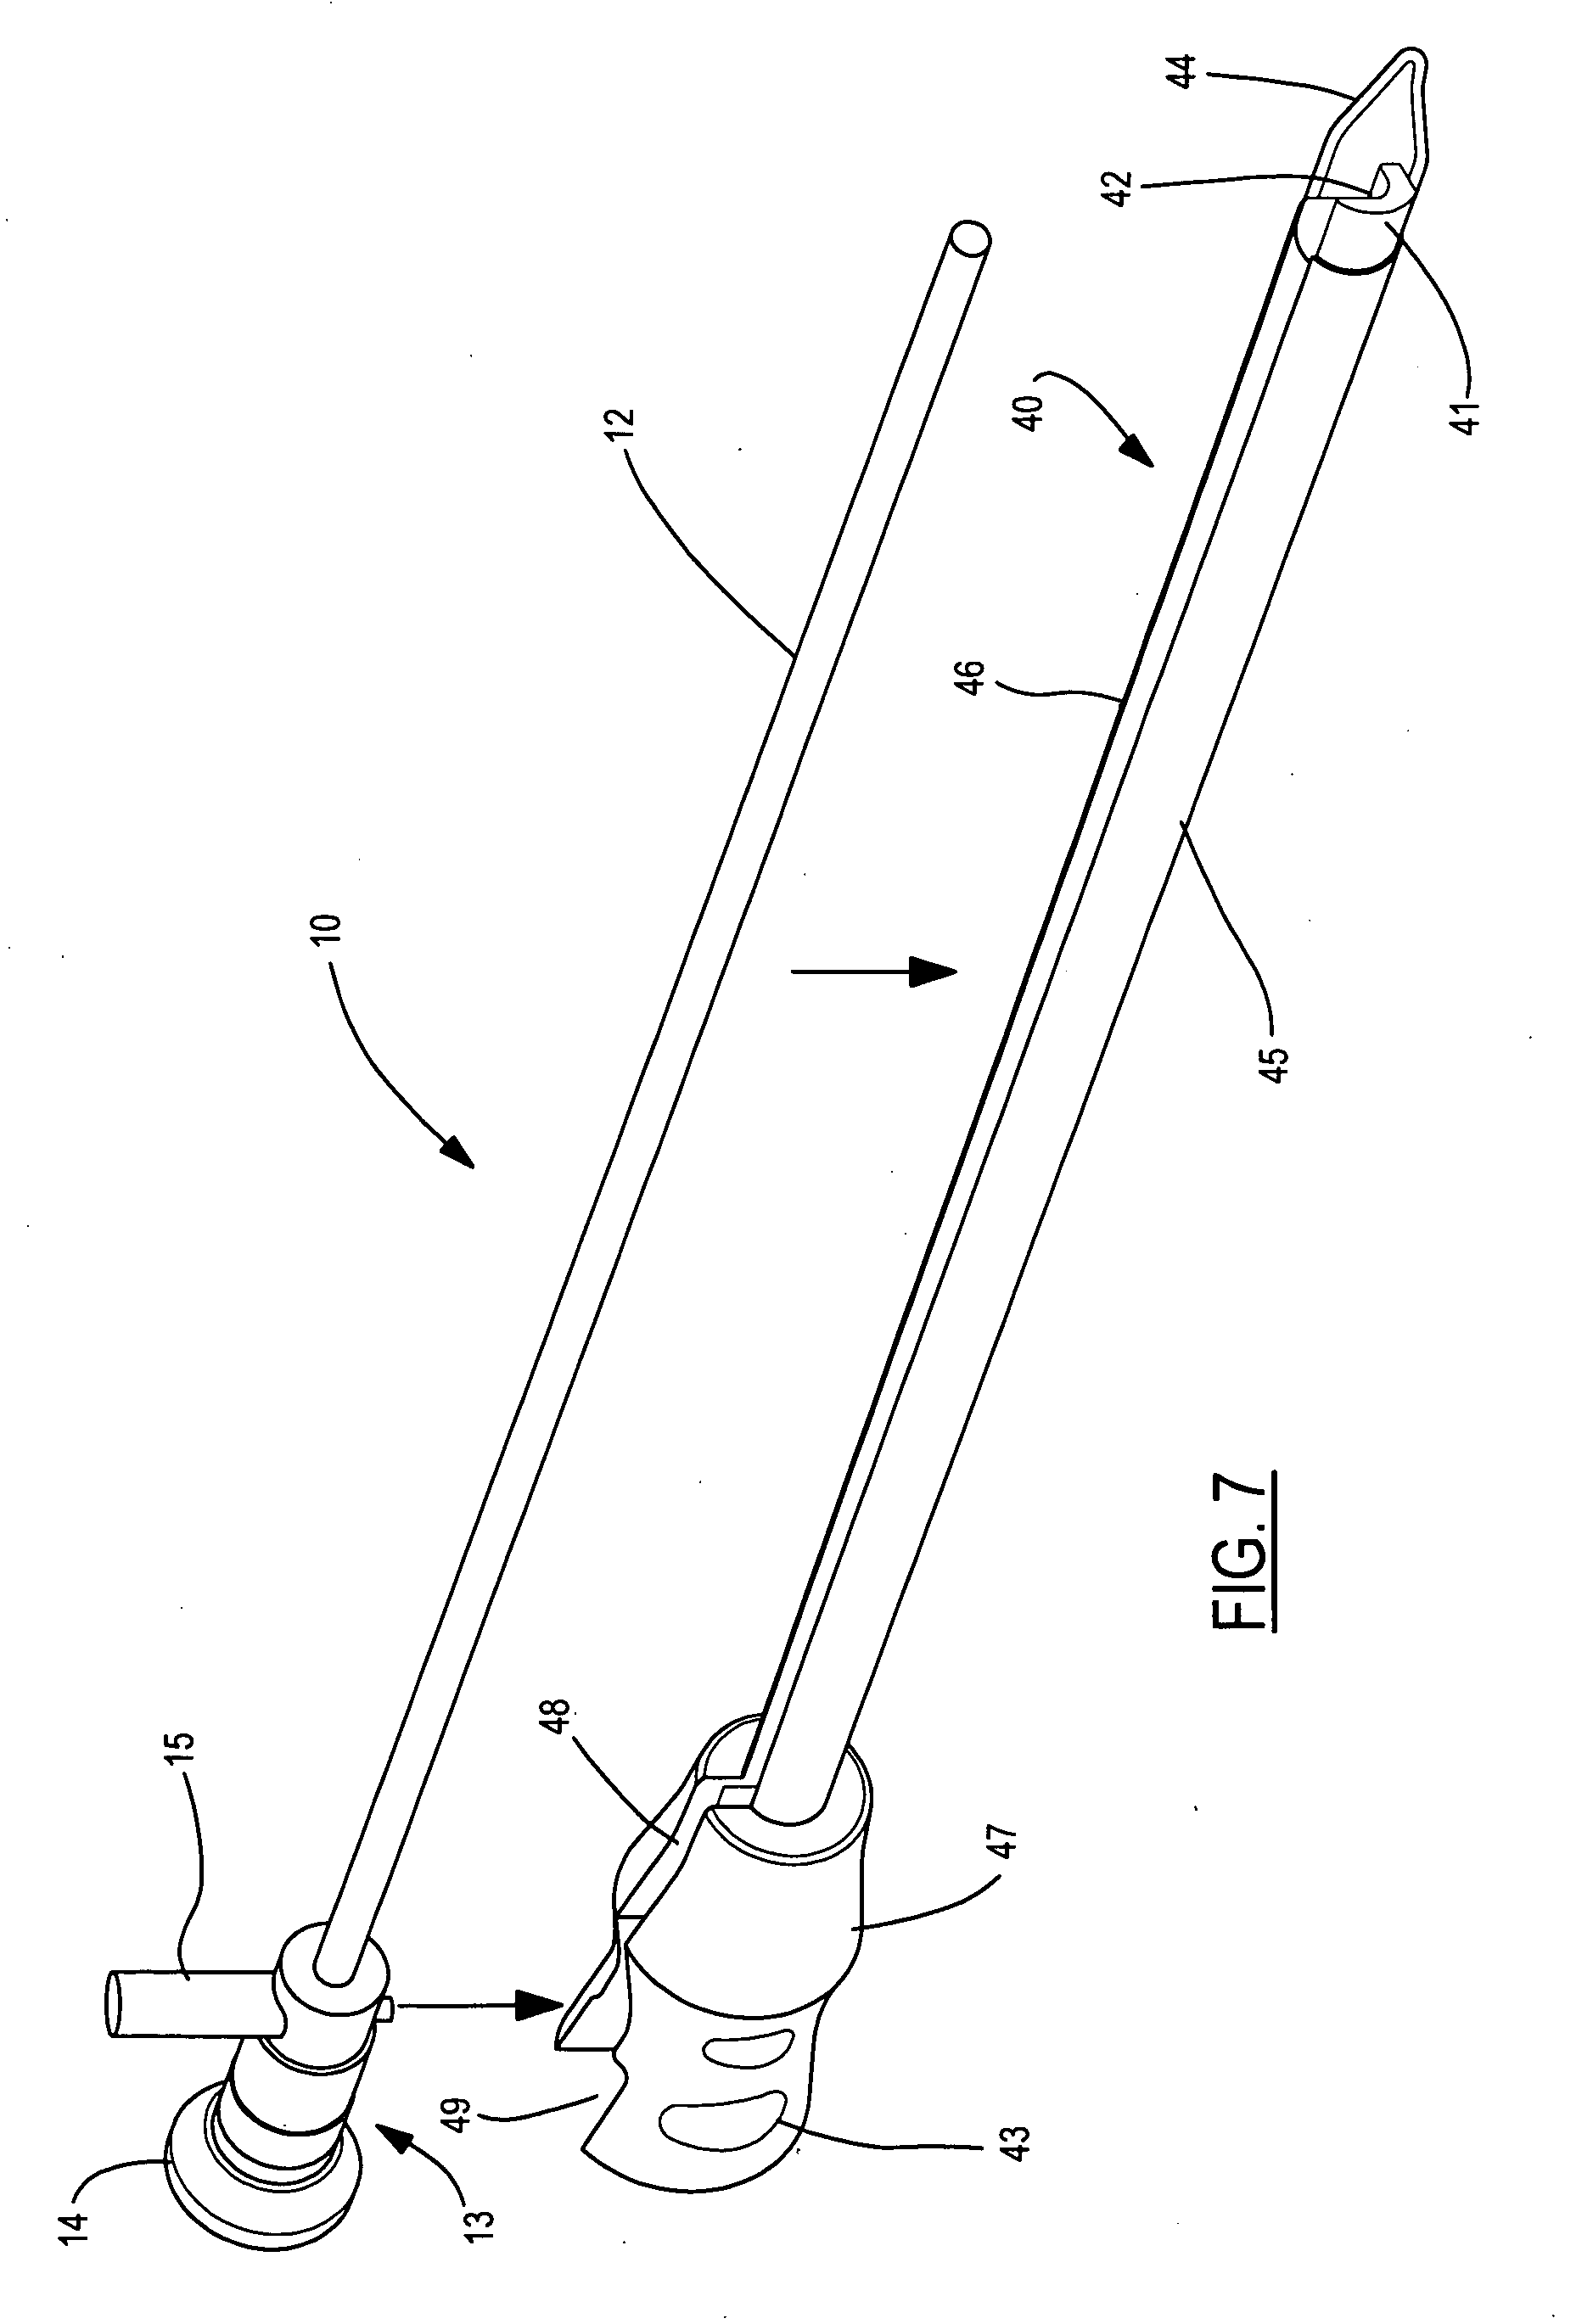 Endoscopic Vessel Dissector With Side Entry